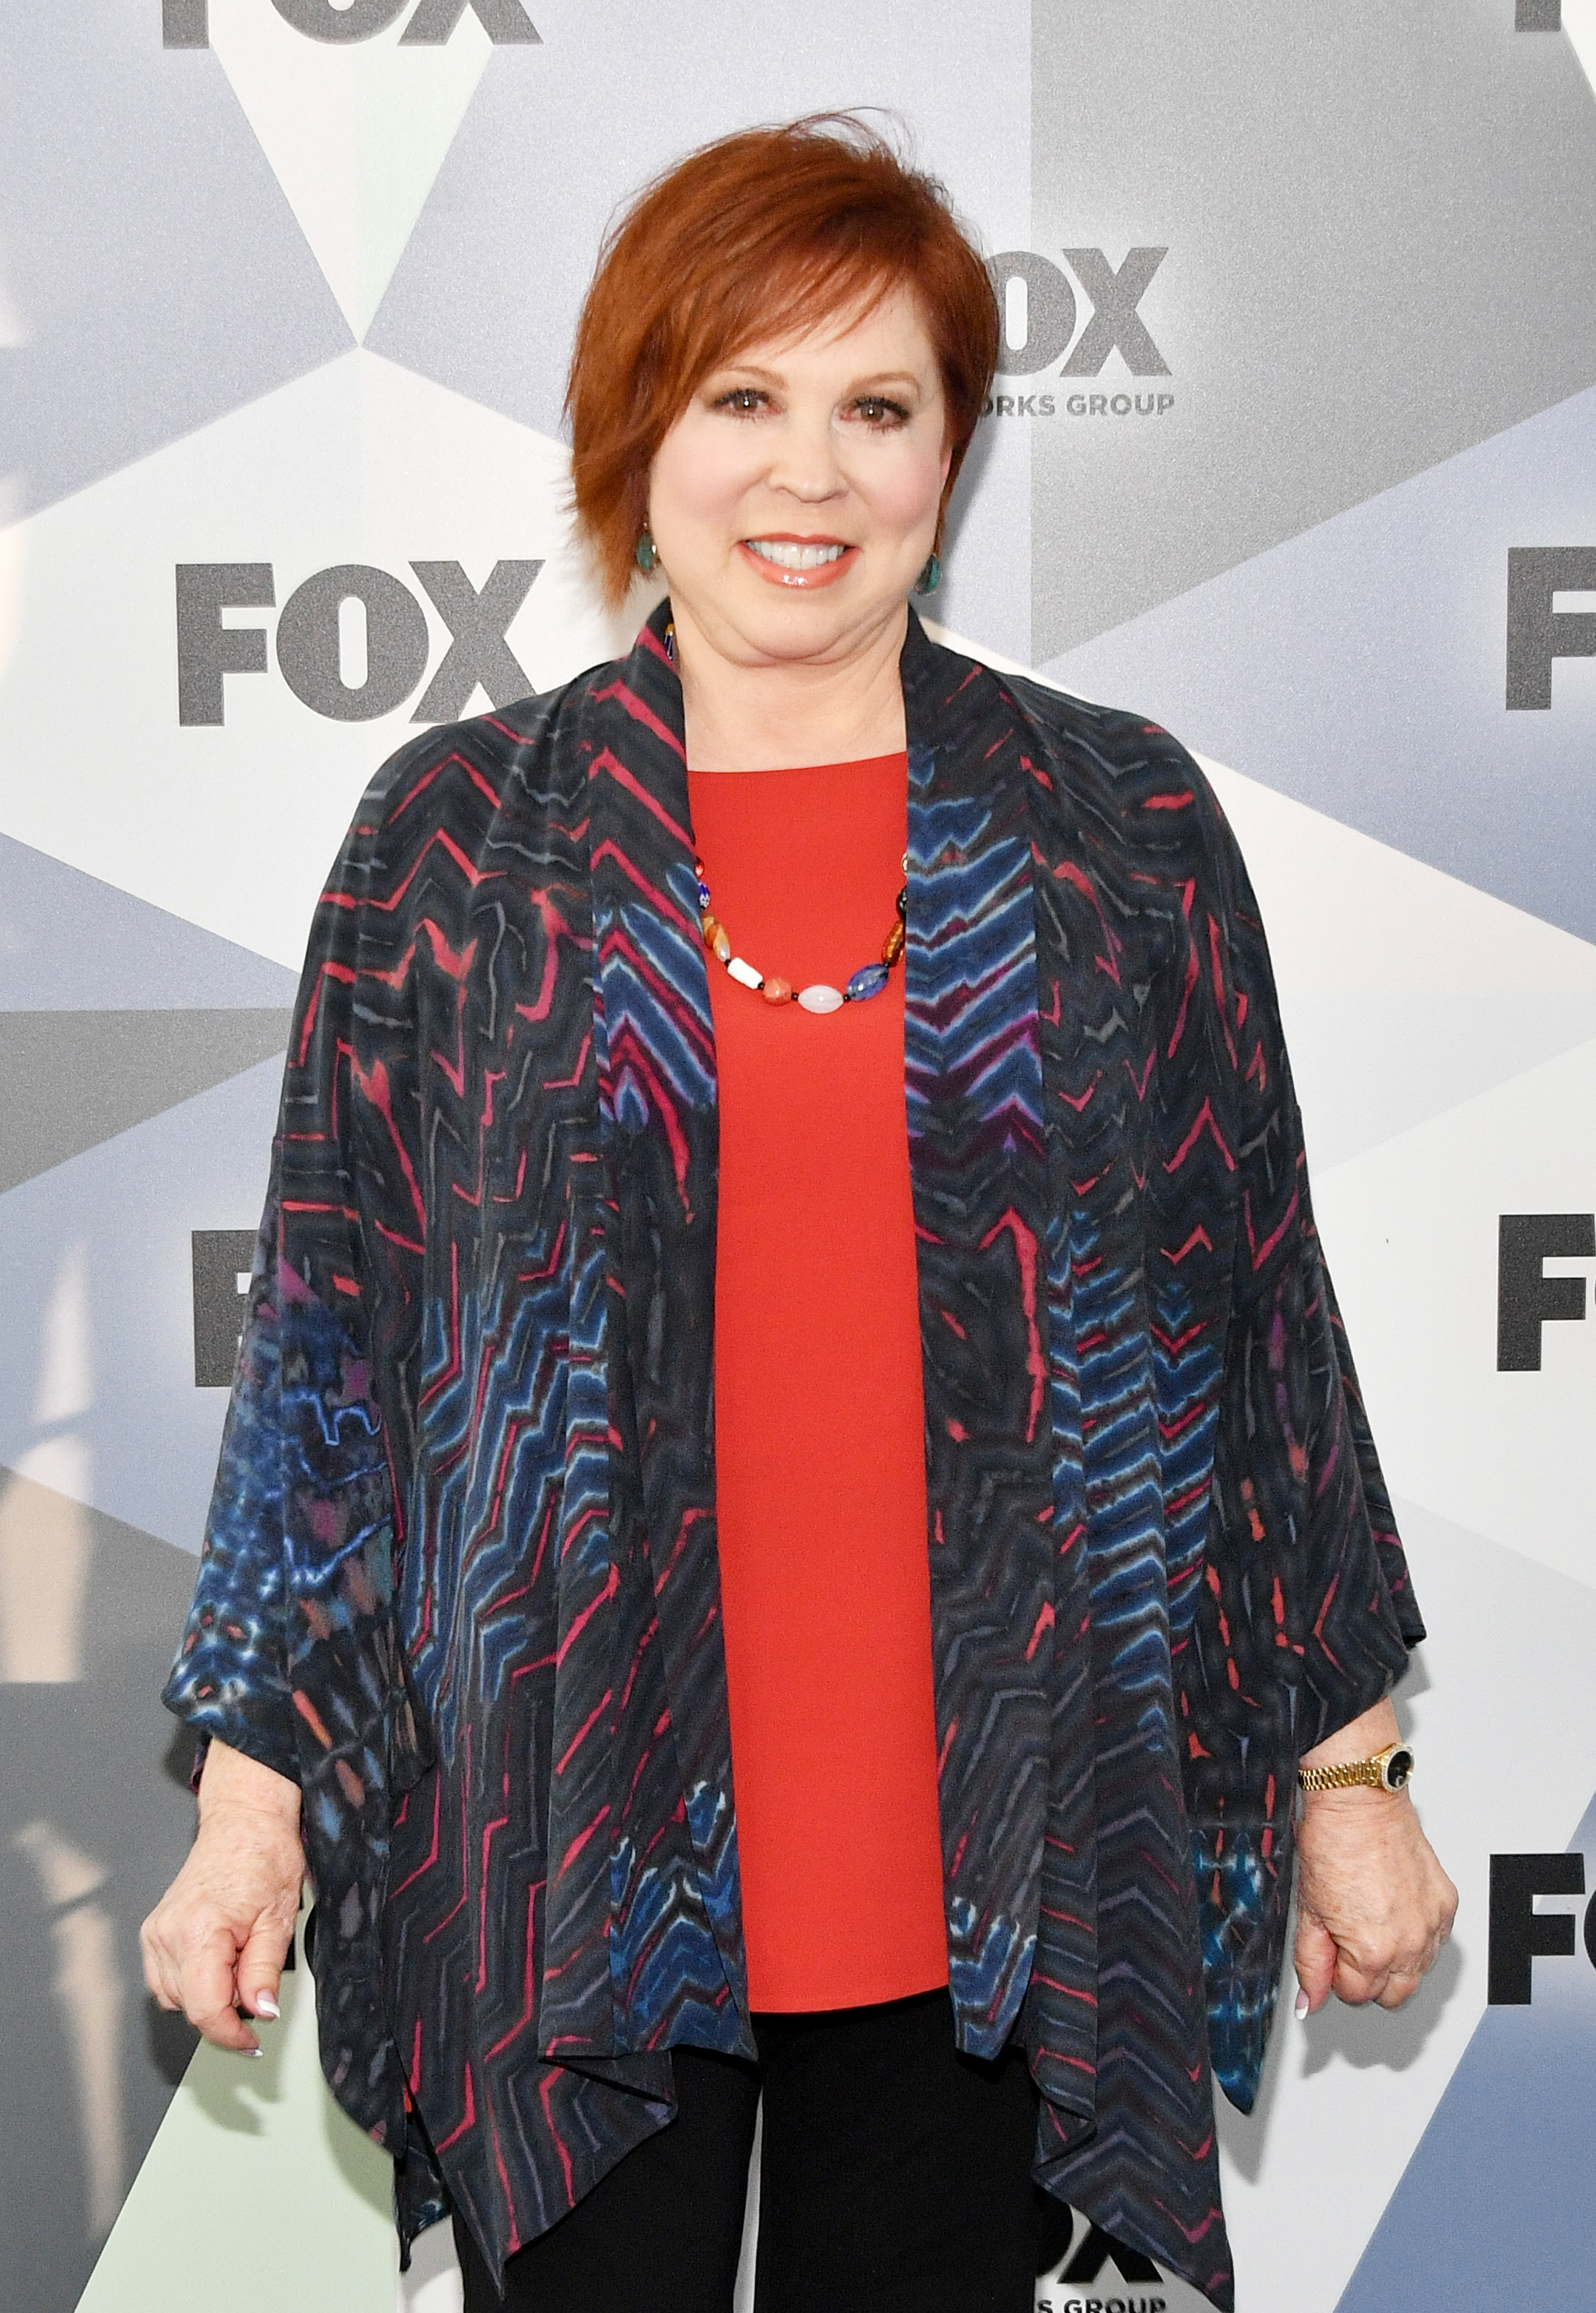 Vicki Lawrence attends the Fox Network Upfront at Wollman Rink, Central Park in New York City, on May 14, 2018. | Source: Getty Images